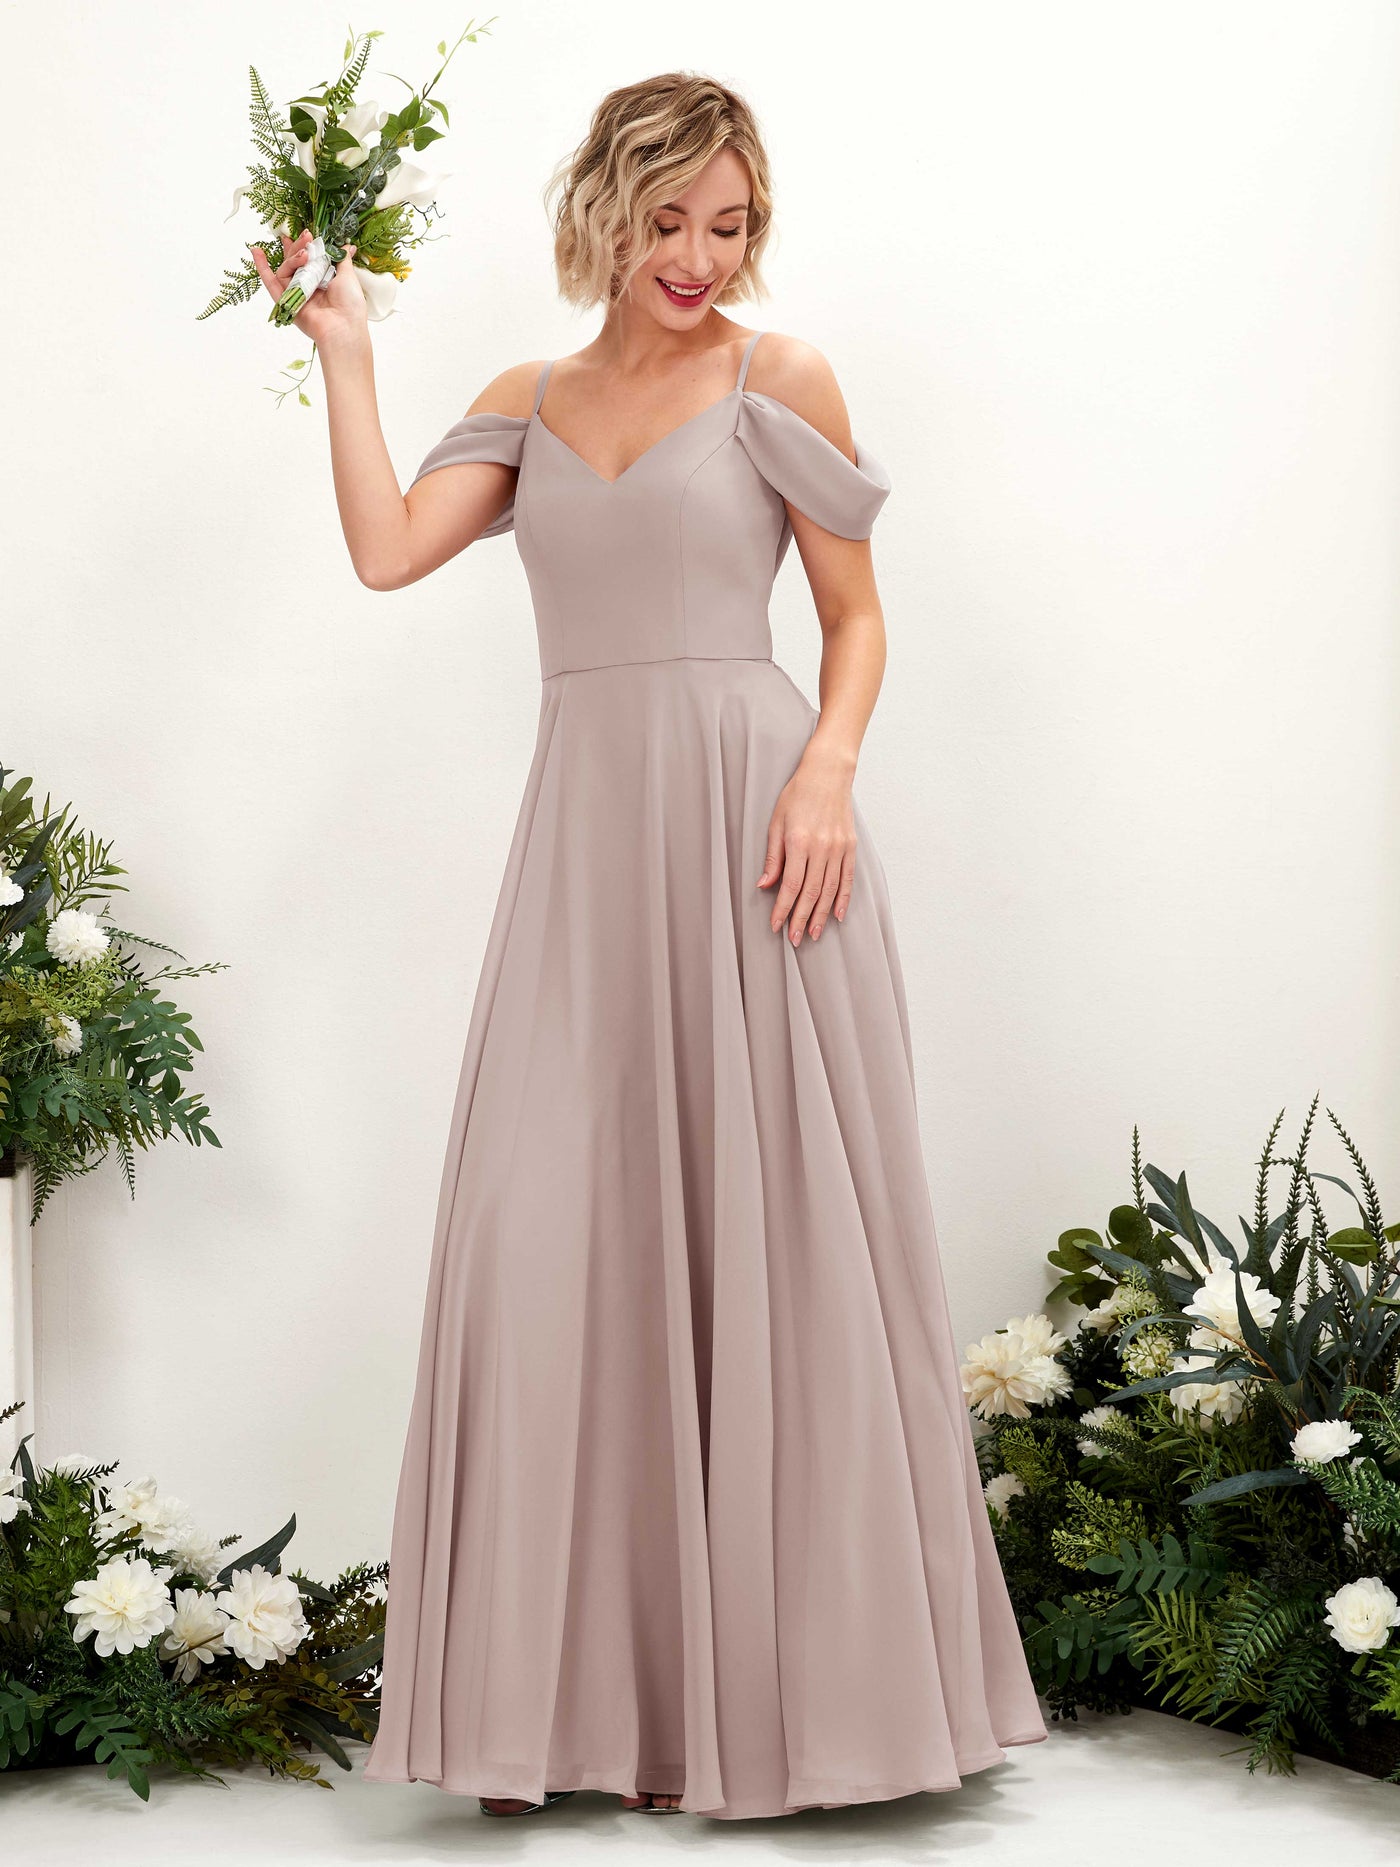 Taupe Bridesmaid Dresses Bridesmaid Dress A-line Chiffon Off Shoulder Full Length Sleeveless Wedding Party Dress (81224924)#color_taupe